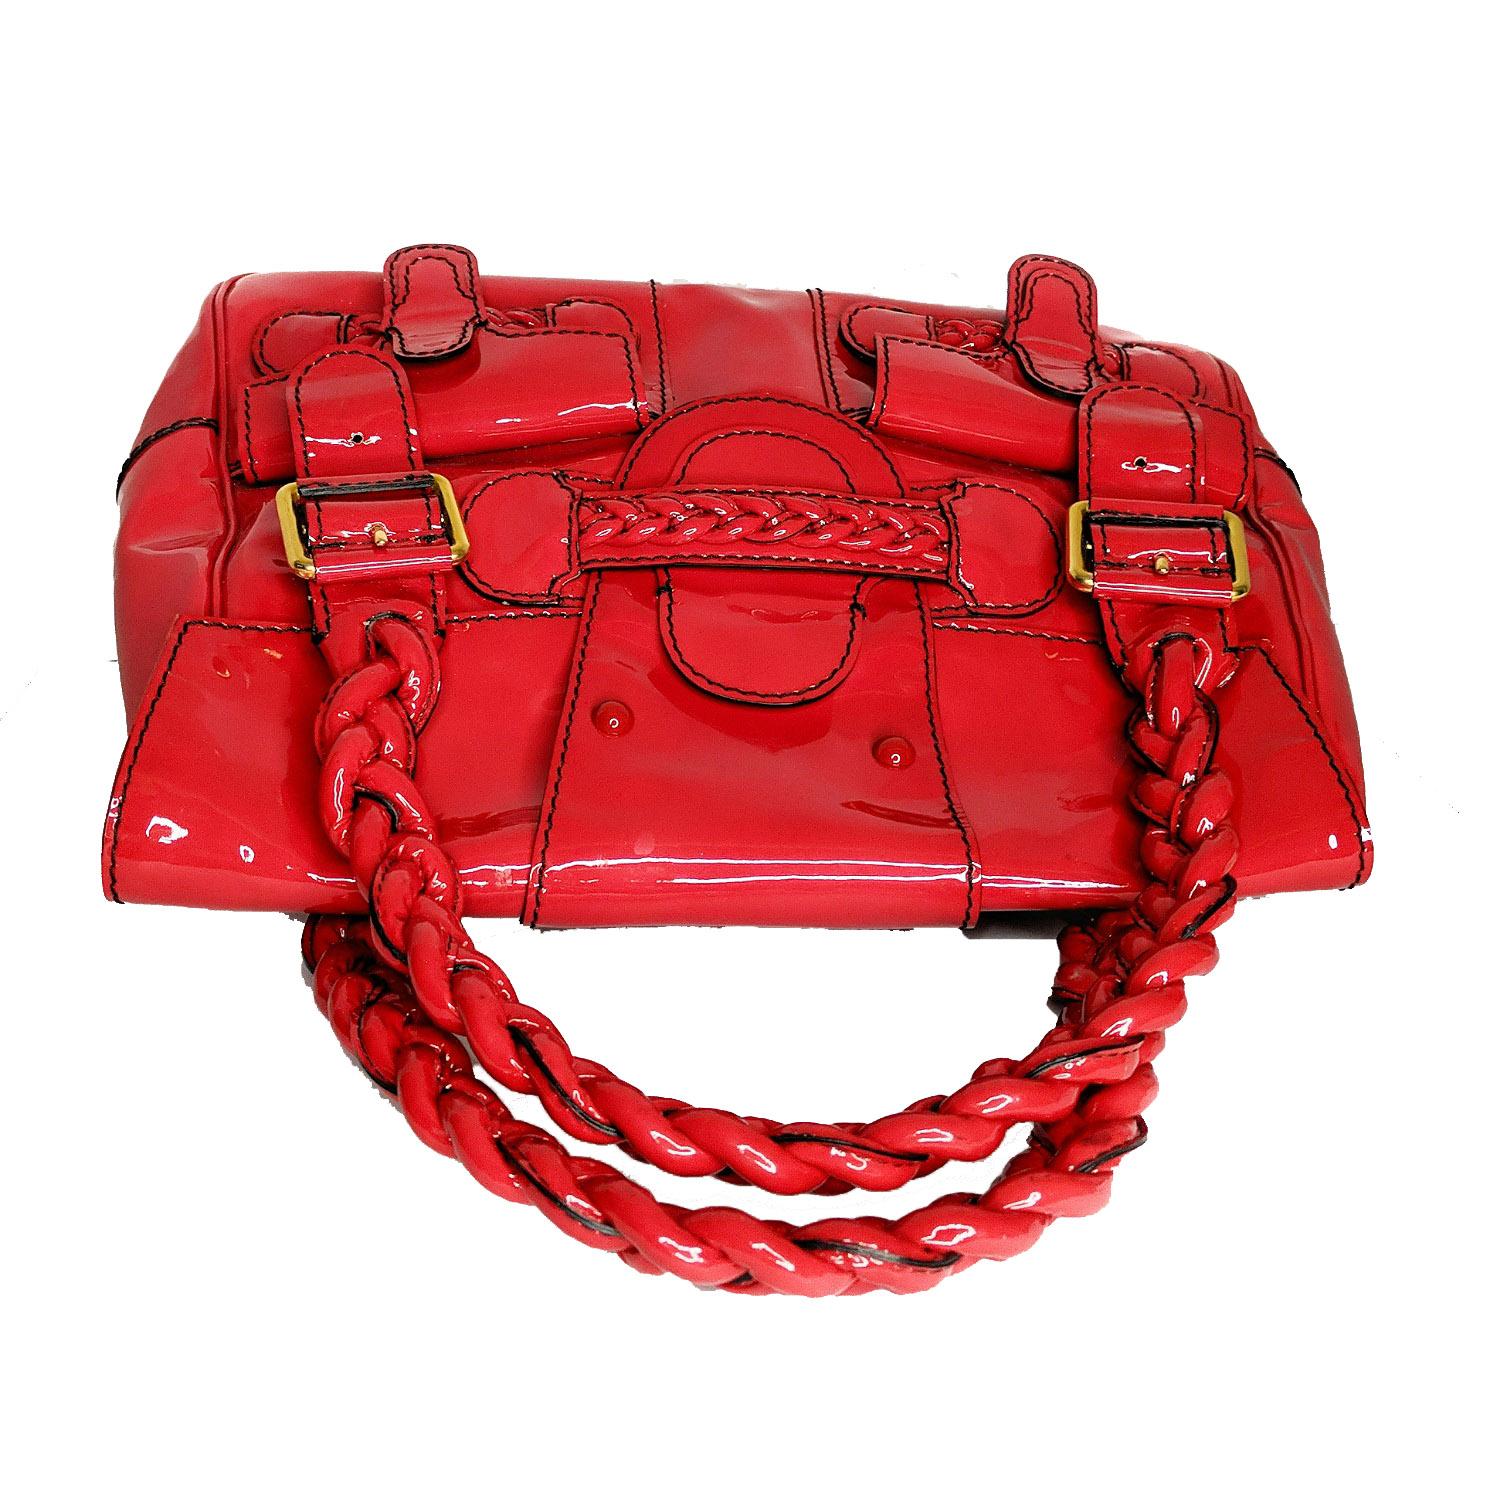 red patent leather handbags